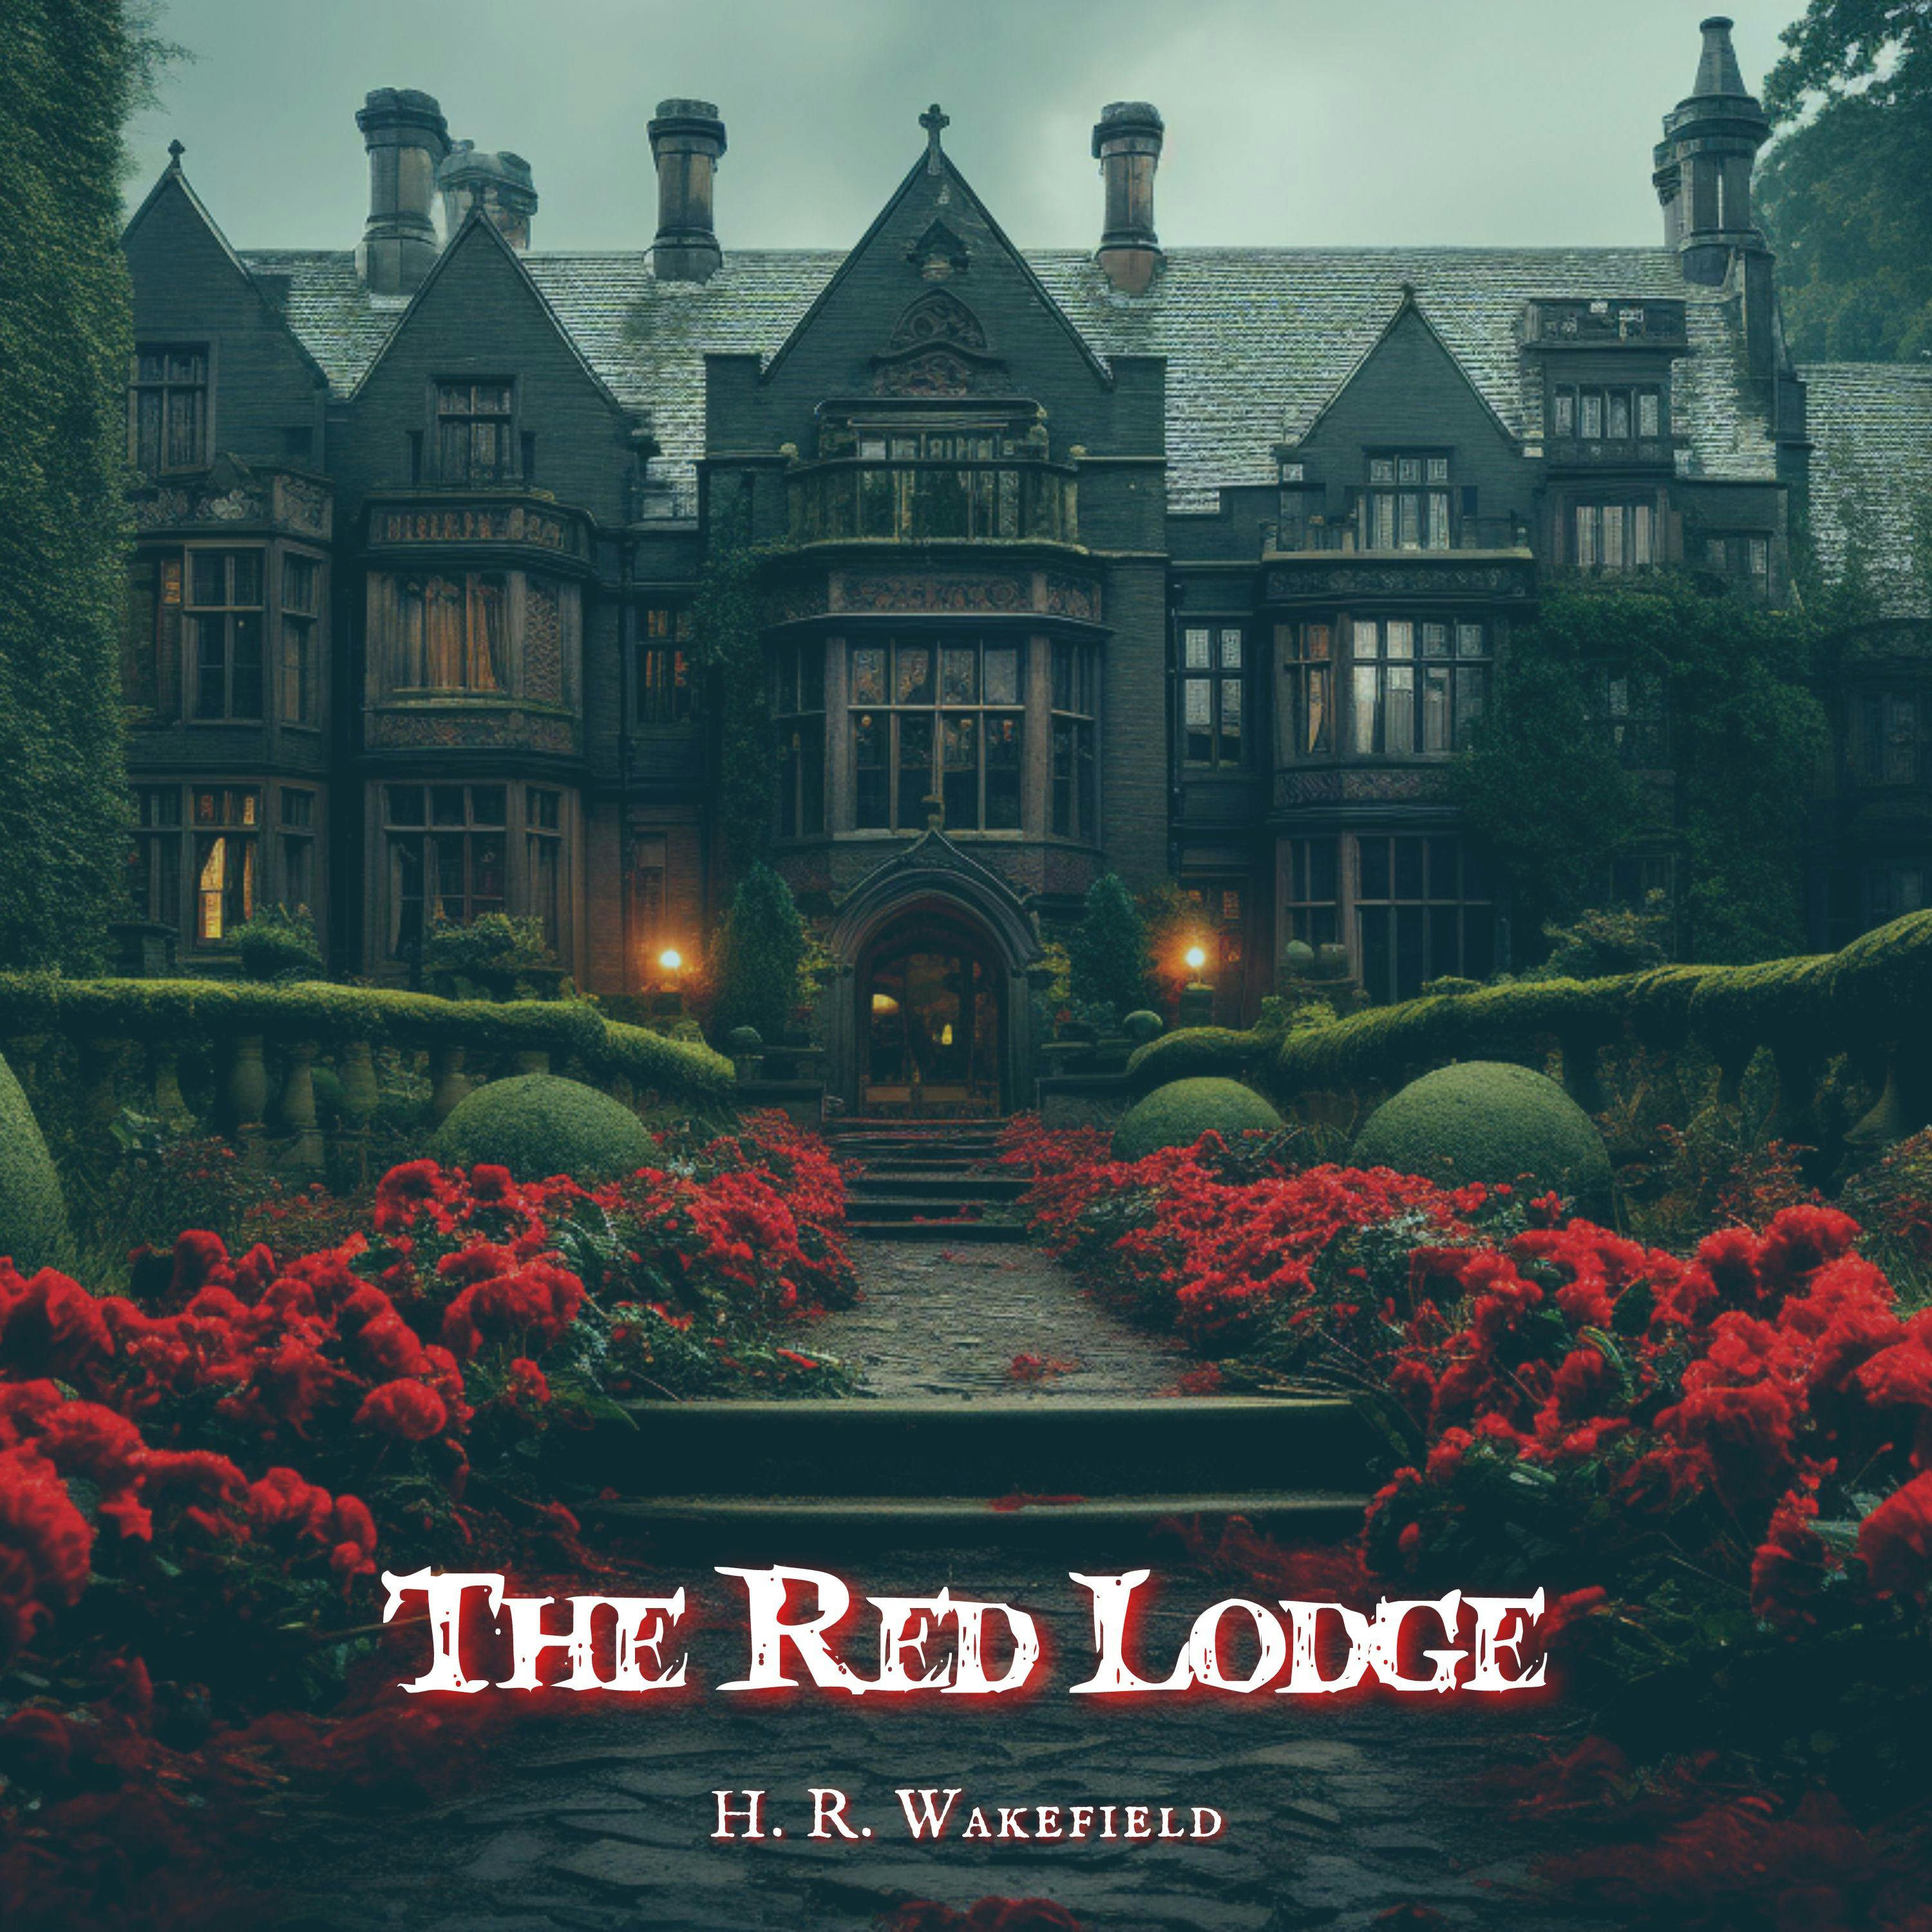 The Red Lodge by H R Wakefield